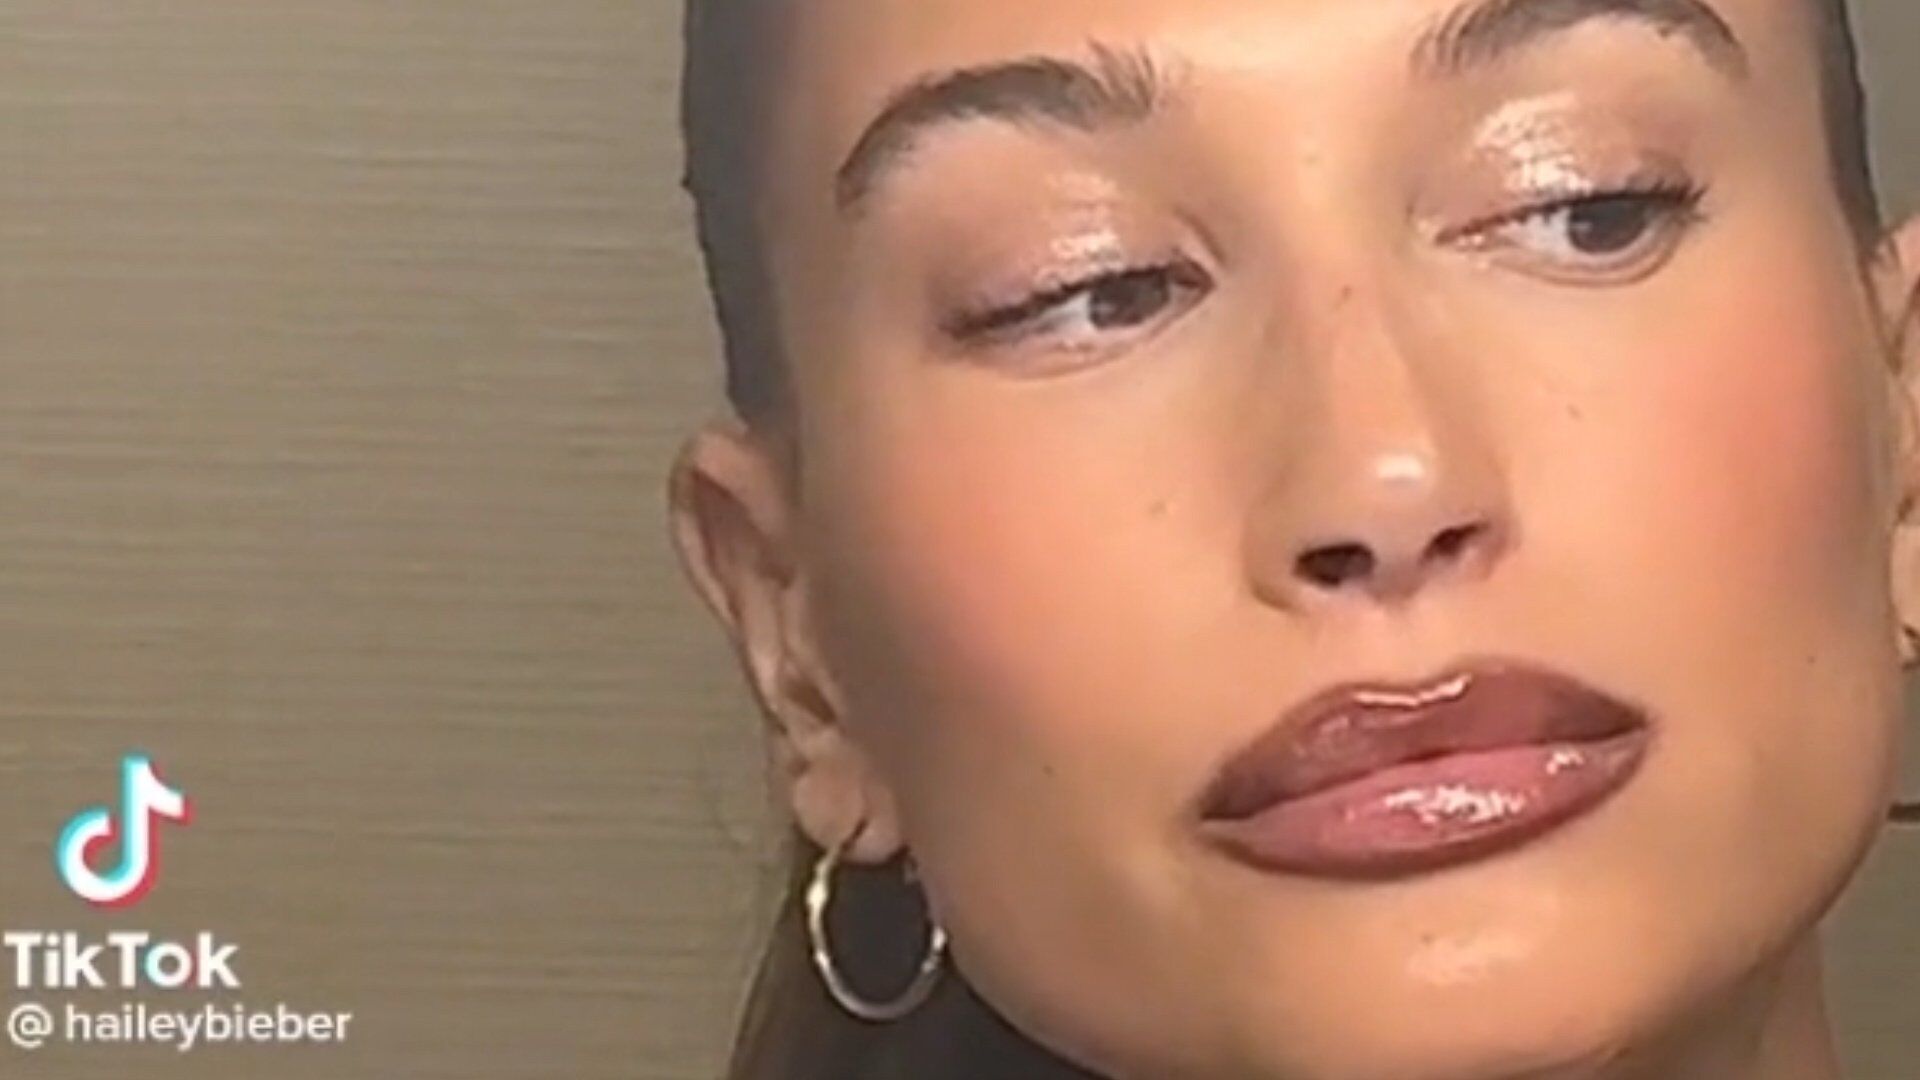 Hailey Bieber accused of cultural appropriation over brownie glazed lips picture